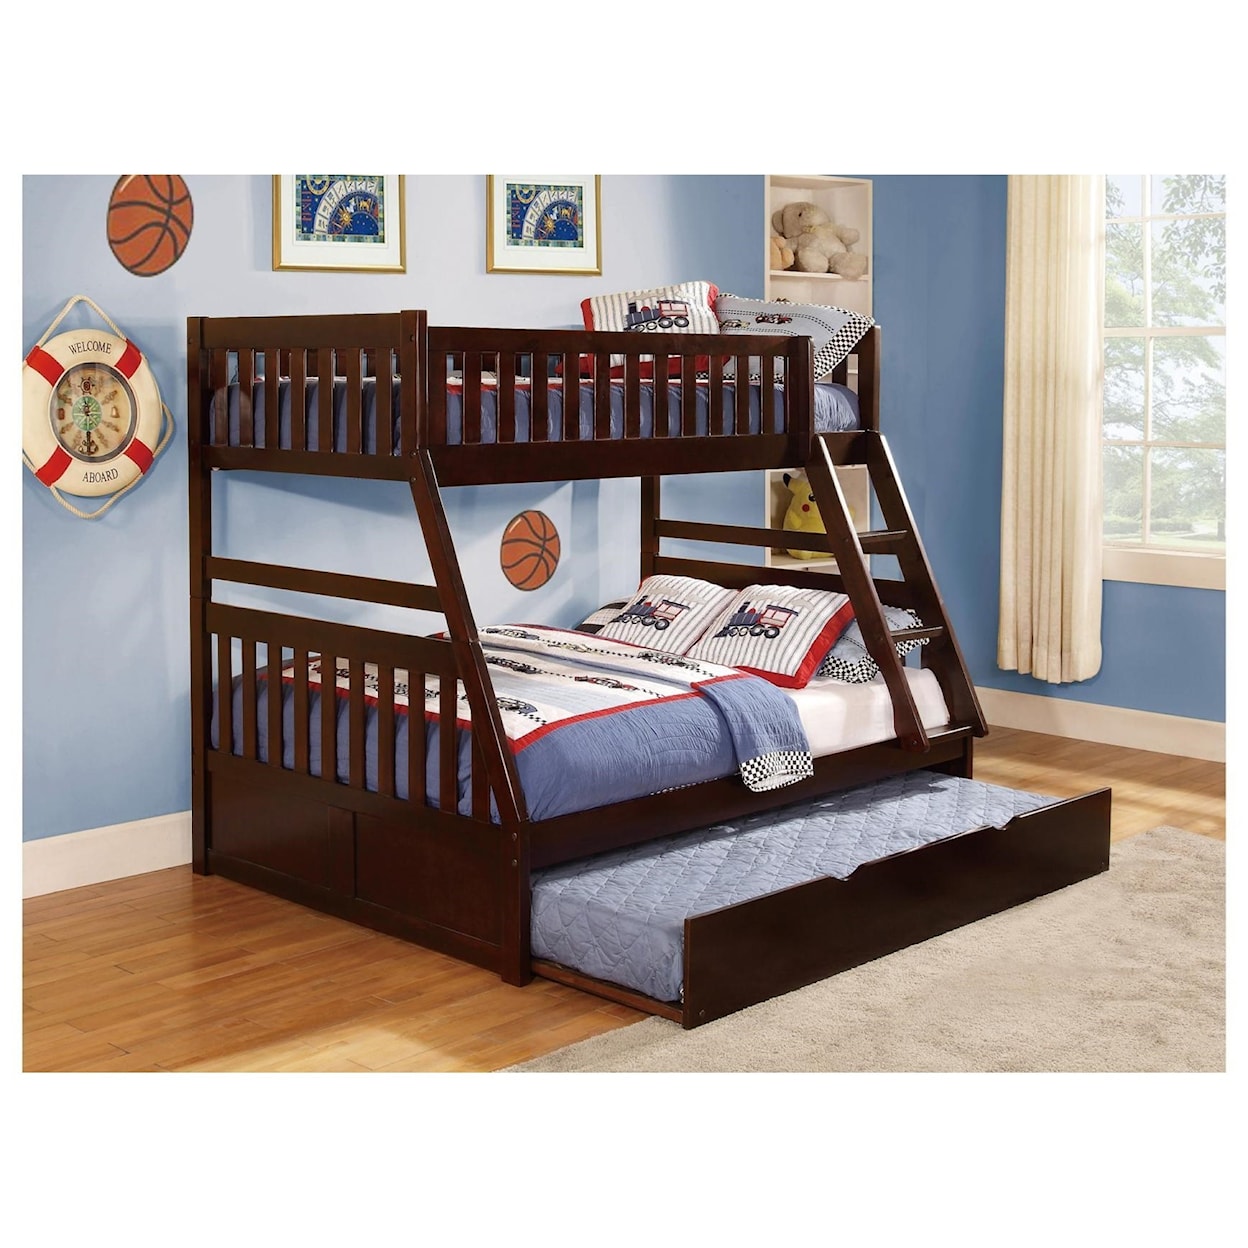 Home Style Cherry Twin Over Full Trundle Bunk Bed